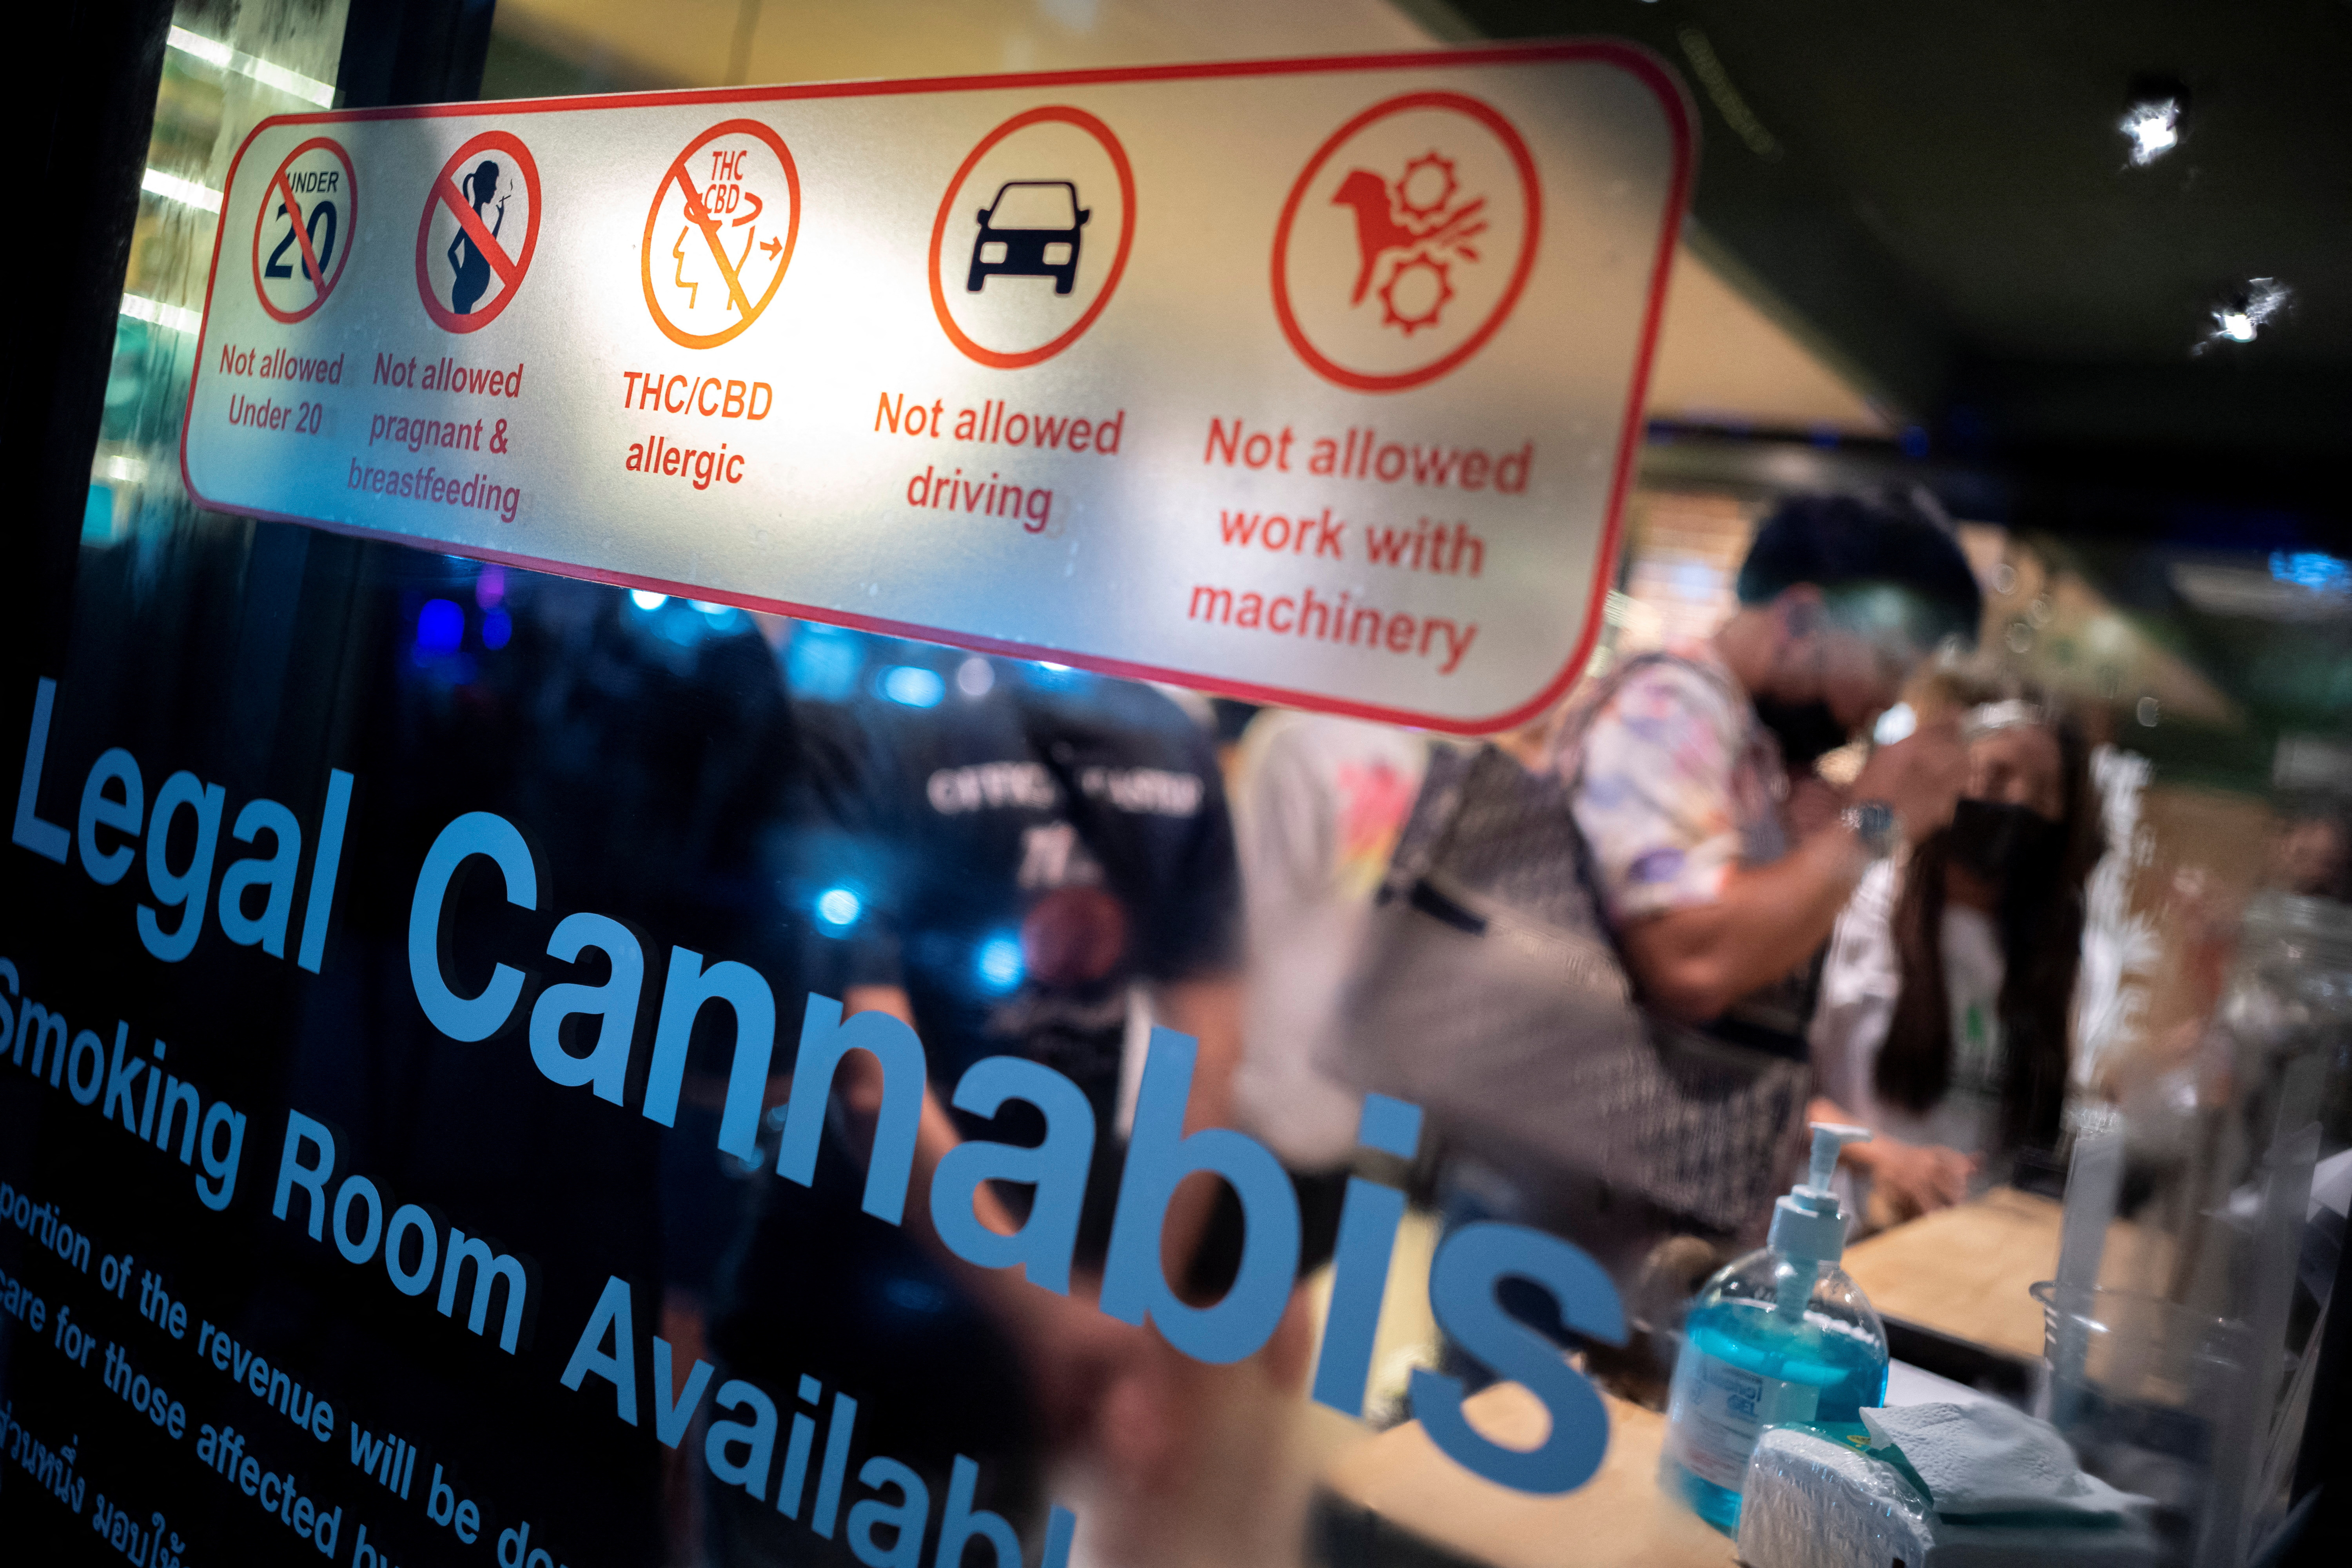 Signage is seen in front of the RG420 cannabis store, at Khaosan Road, one of the favourite tourist spots in Bangkok